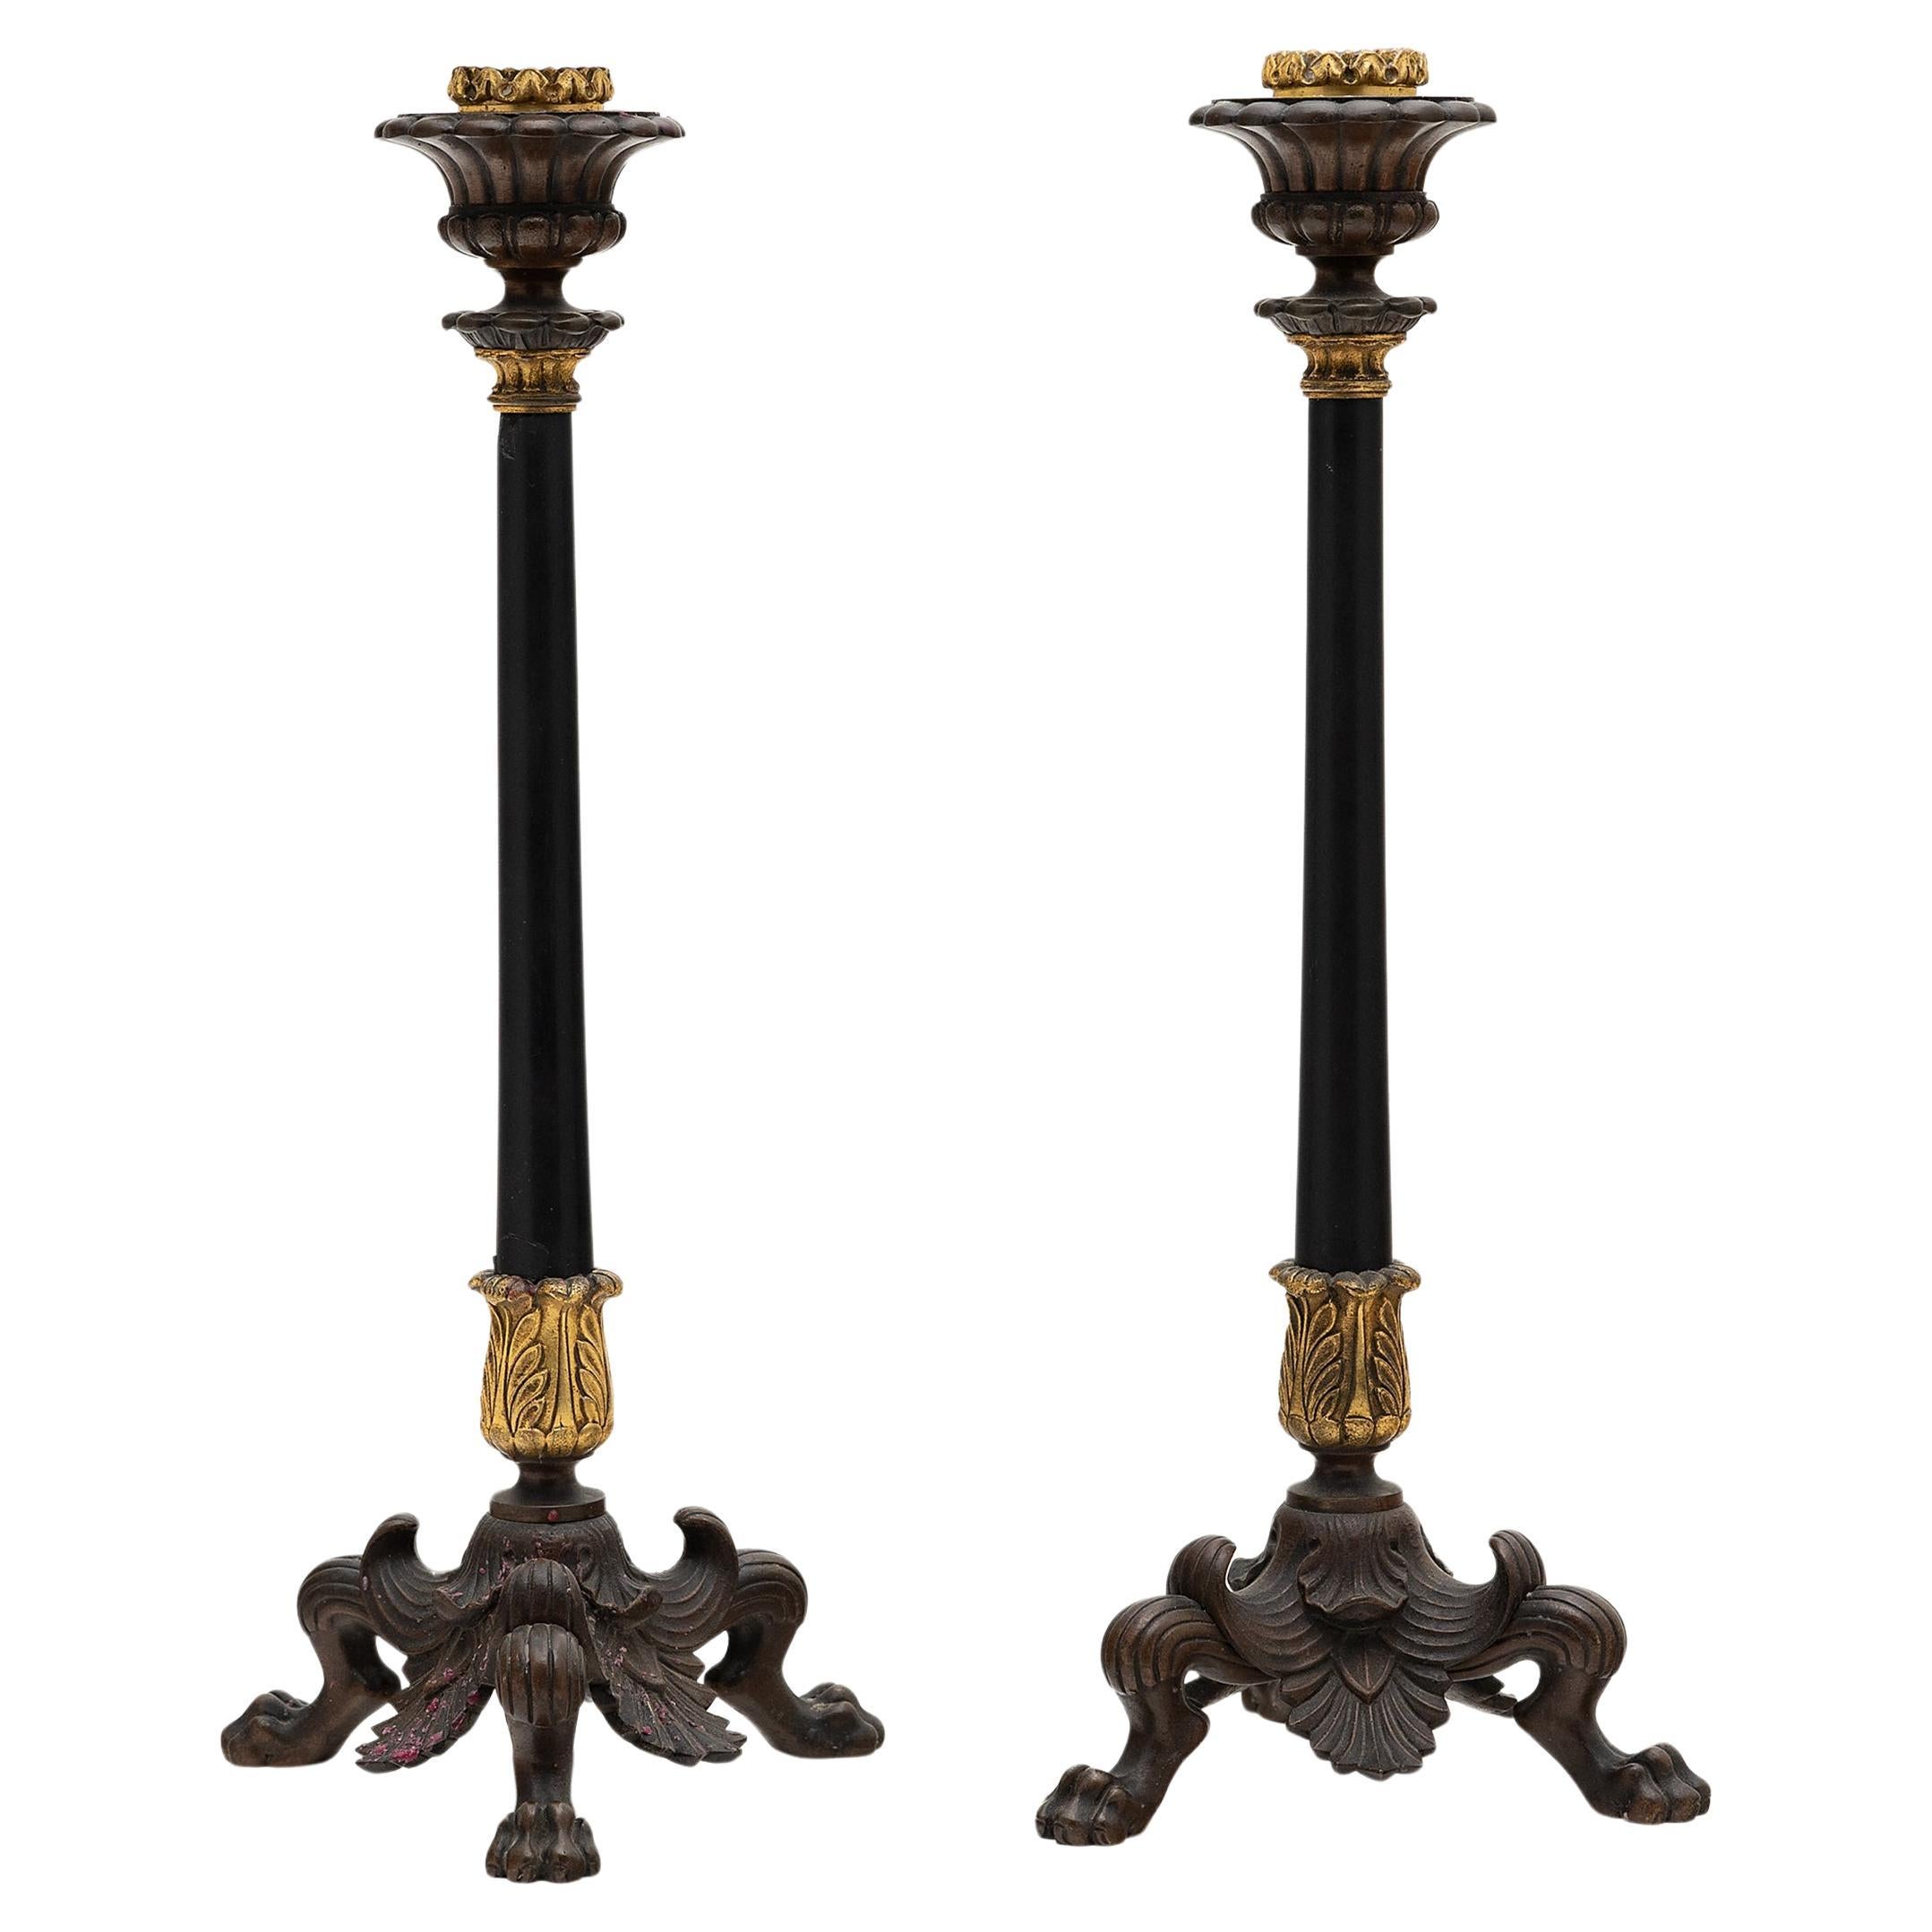 Pair of French Gilt Bronze and Slate Candlesticks, c. 1850